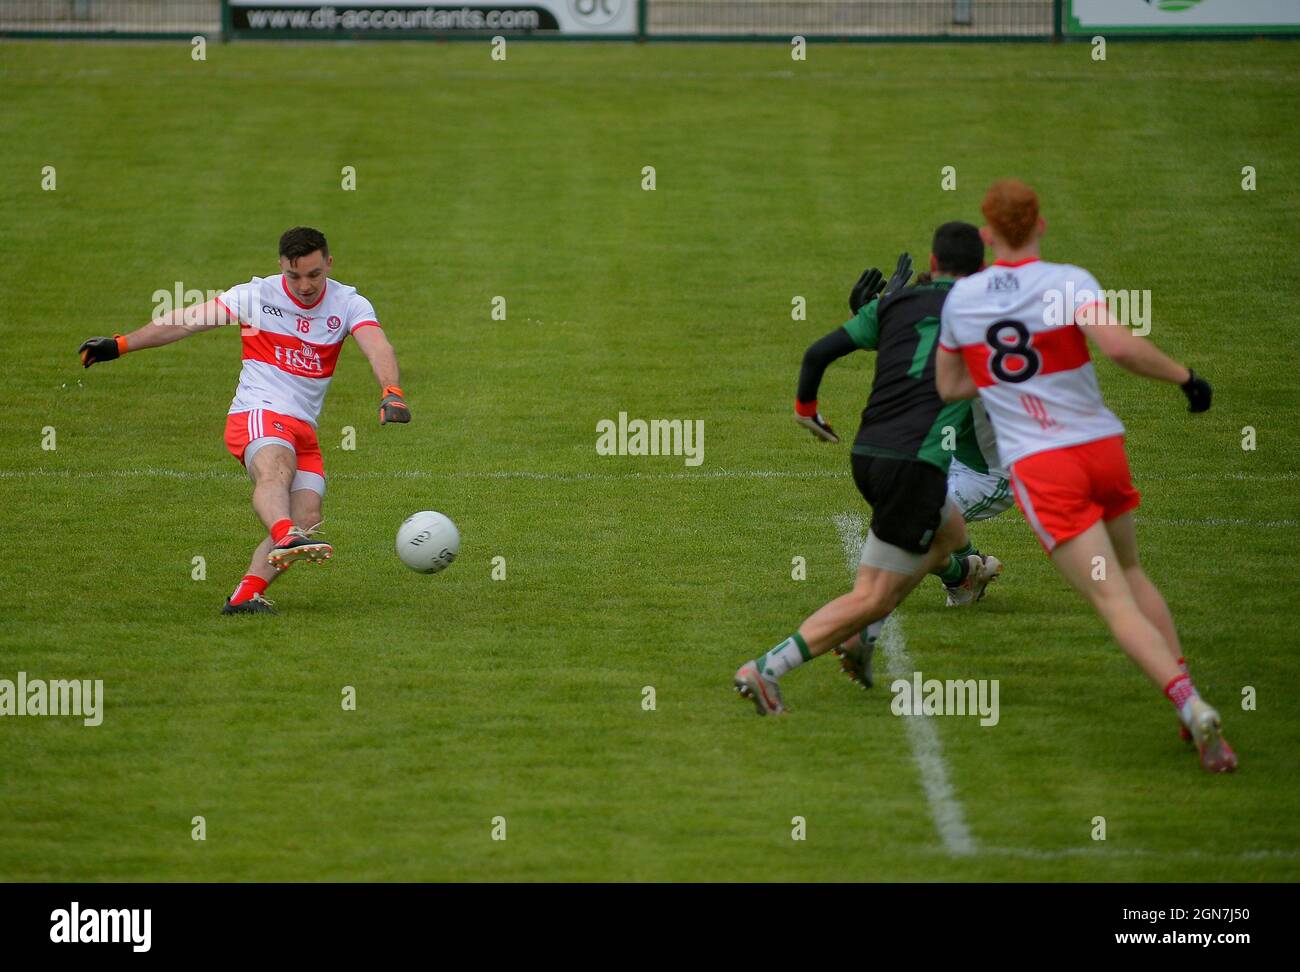 GAA football under 20 inter county game Derry (in red) v Fermanagh. ©George Sweeney / Alamy Stock Photo Stock Photo